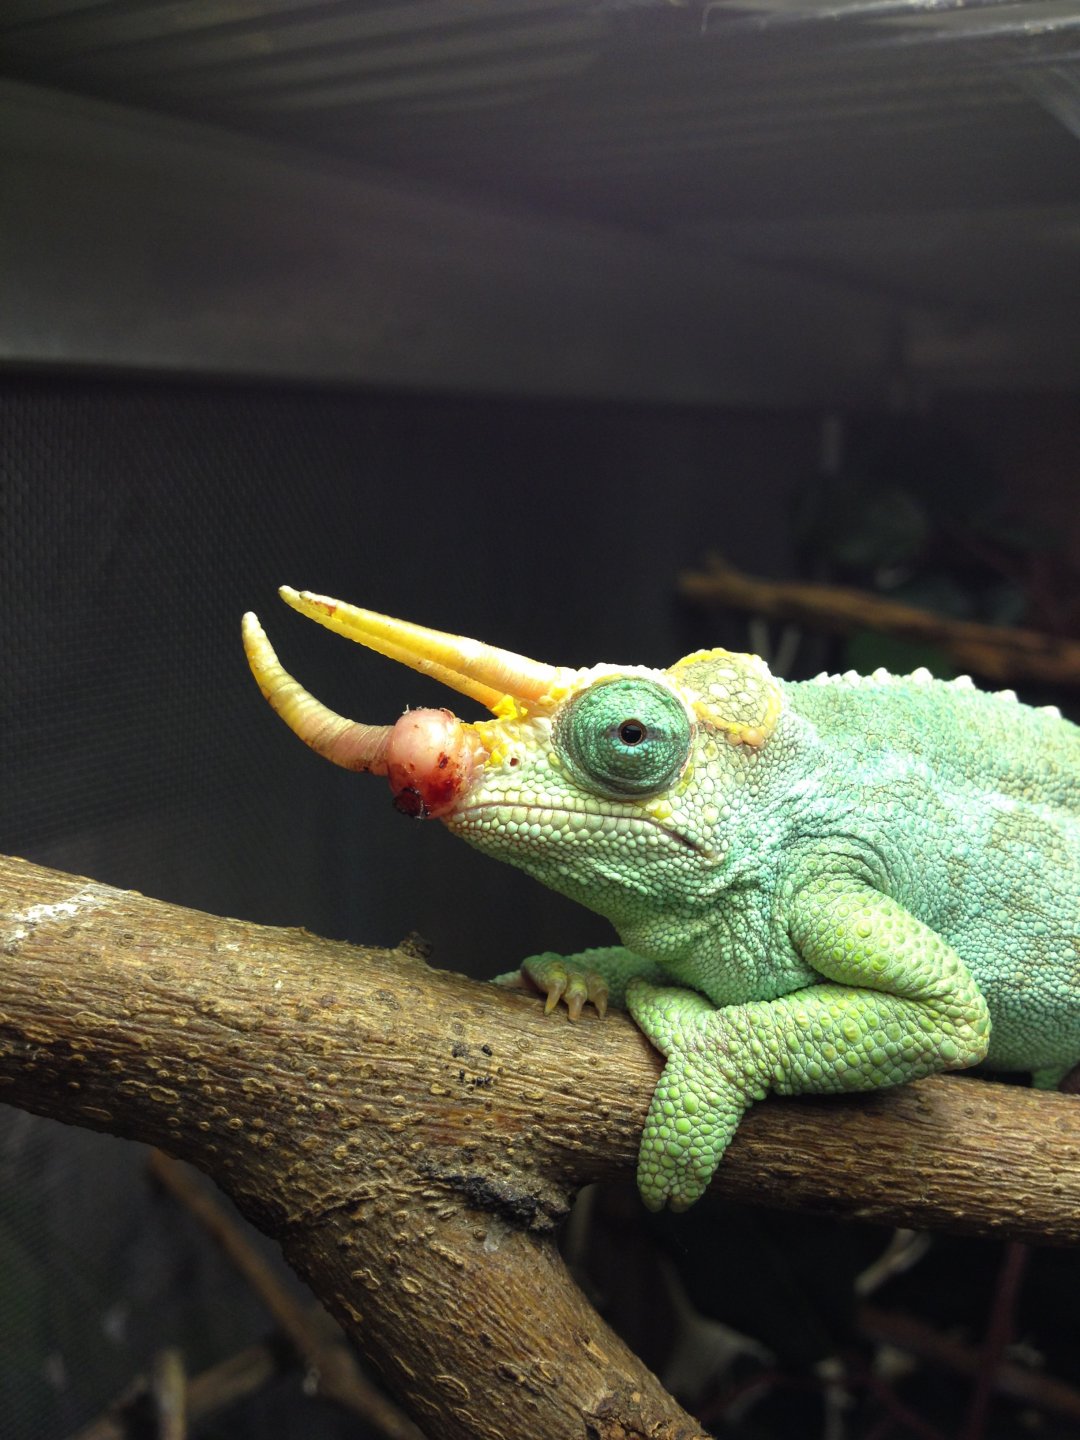 How To Take Care Of A Chameleon Lizard